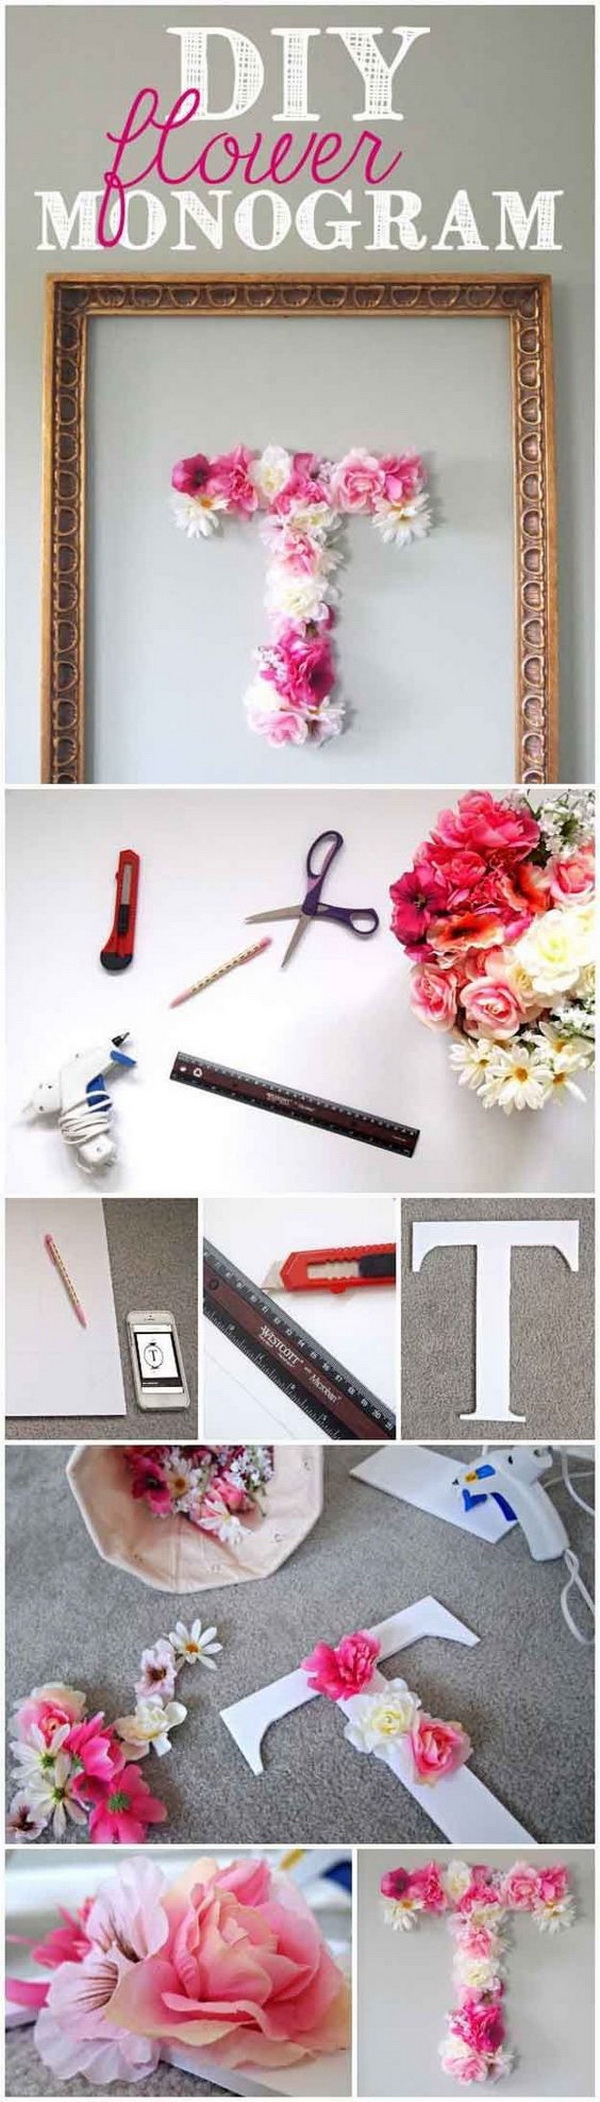 DIY Faux Flower Monogram. Make a pretty decorative letter with faux flowers for teen girls room decor! Totally easy and quick to make in hours!